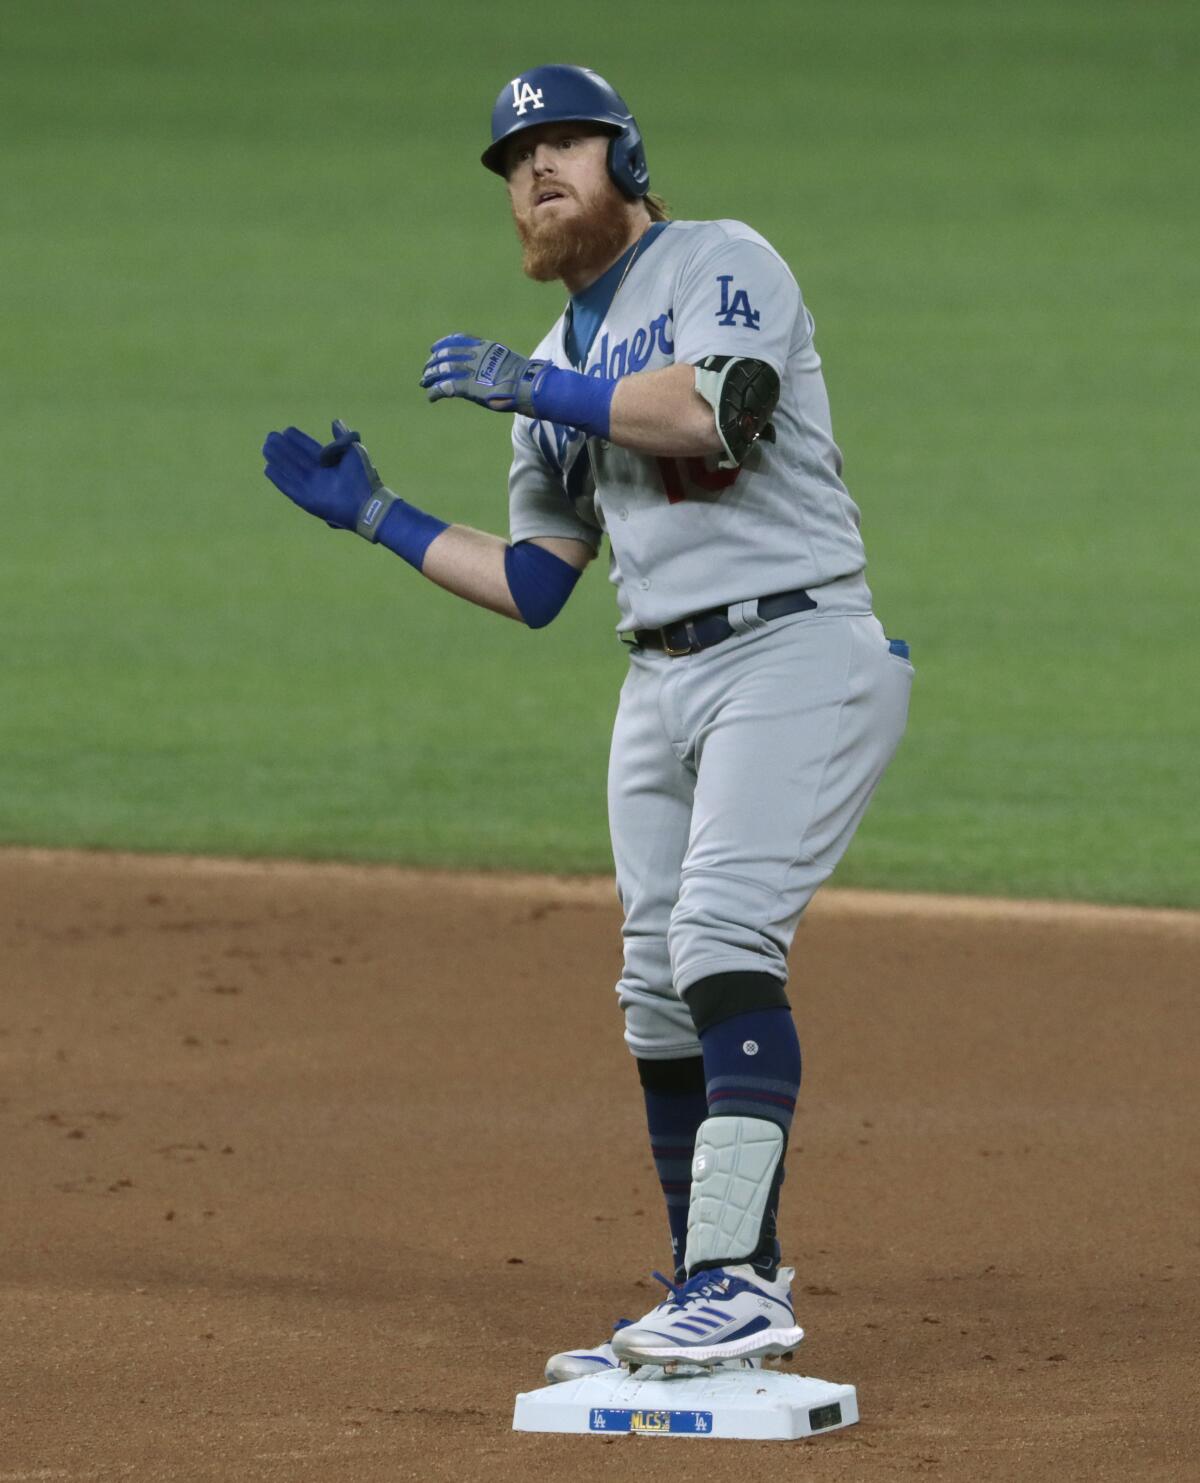 Dodgers third baseman Justin Turner celebrates after hitting a double in the first inning against the Braves.